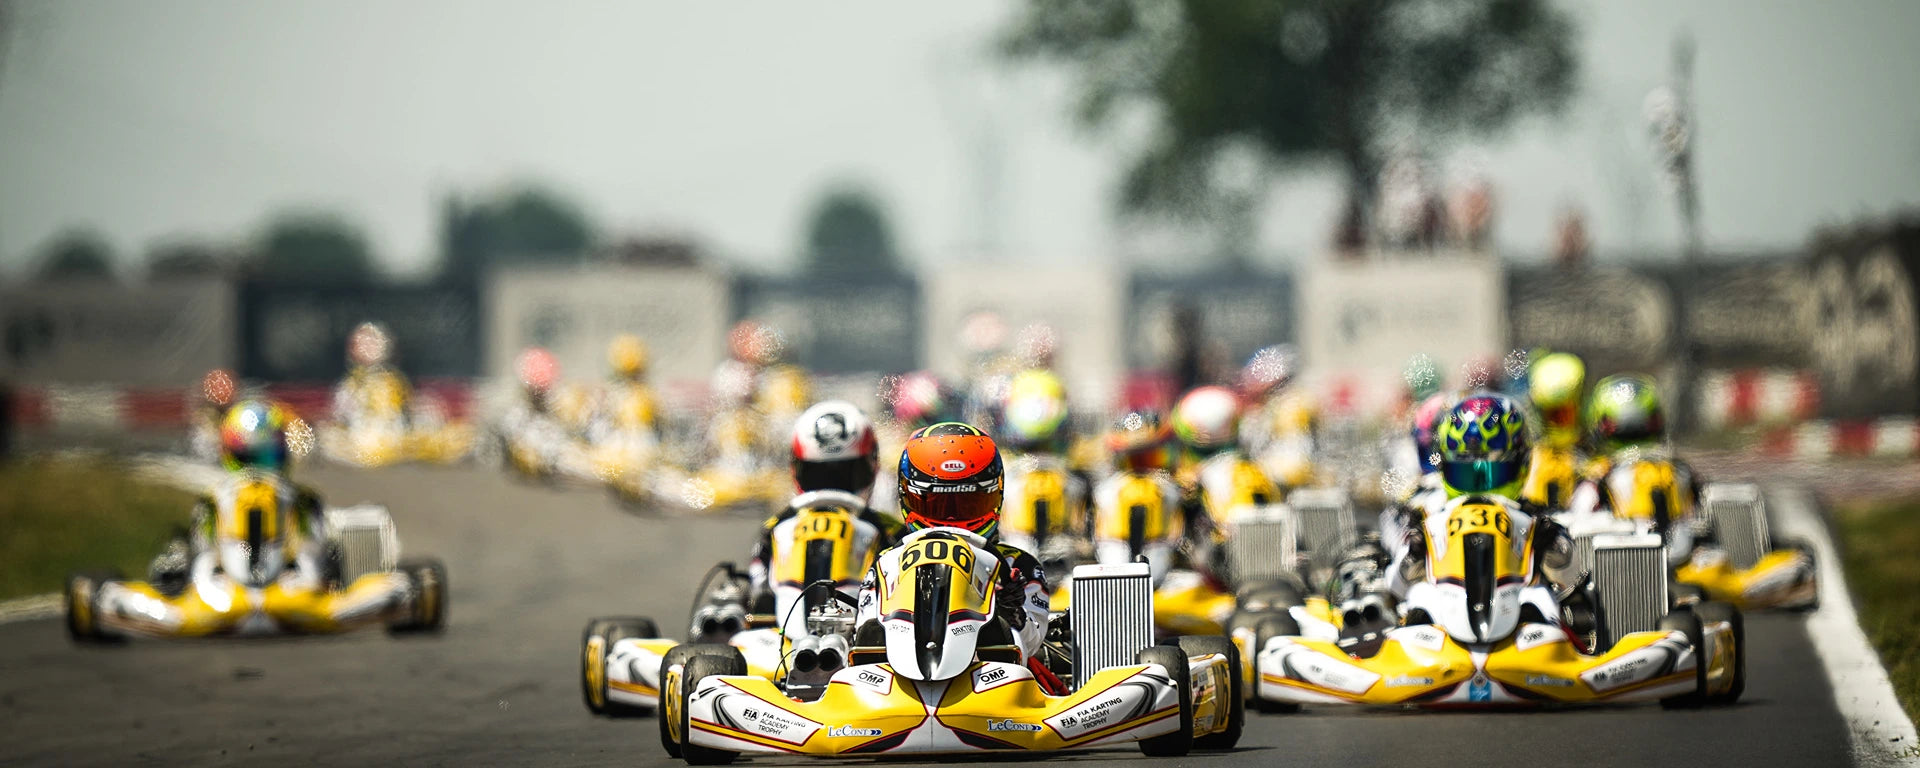 Karting - a discipline which is more important than you might think